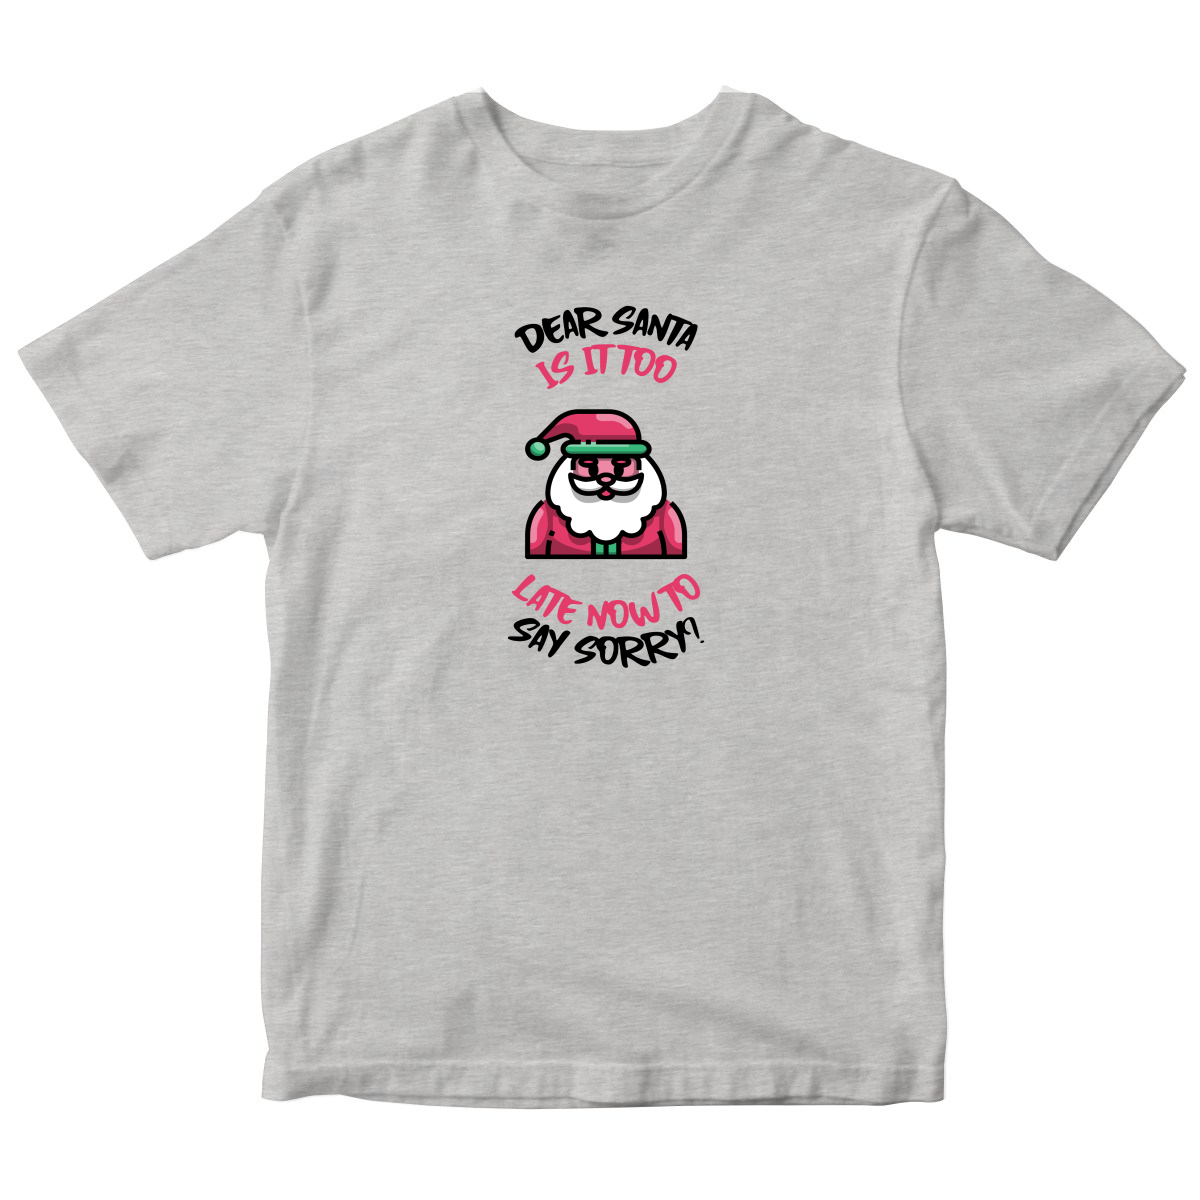 Dear Santa, Is It Too Late to Say Sorry? Kids T-shirt | Gray